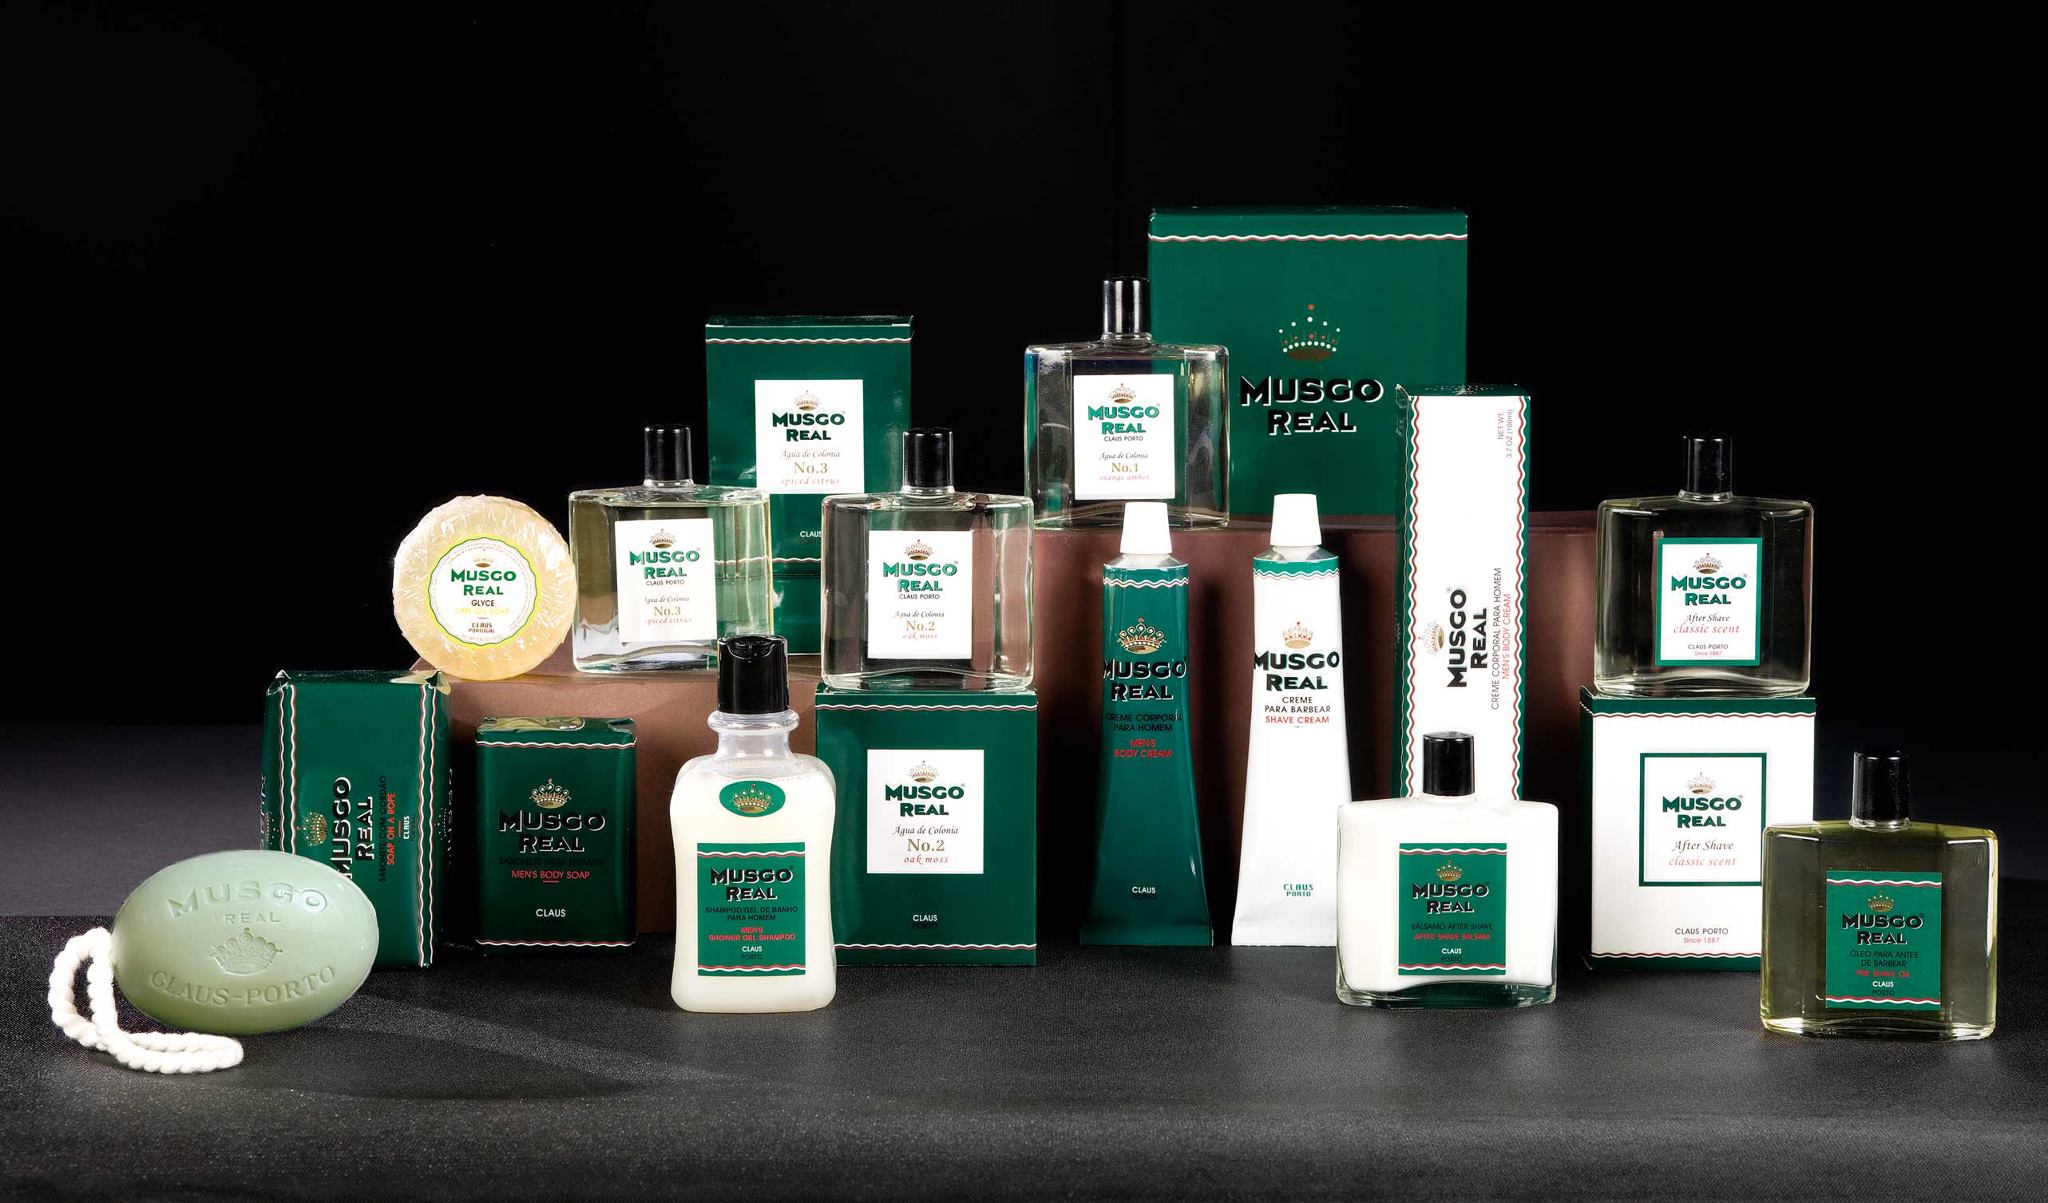 Musgo Real Men’s Shaving and Grooming Products: From Portugal to Your Door